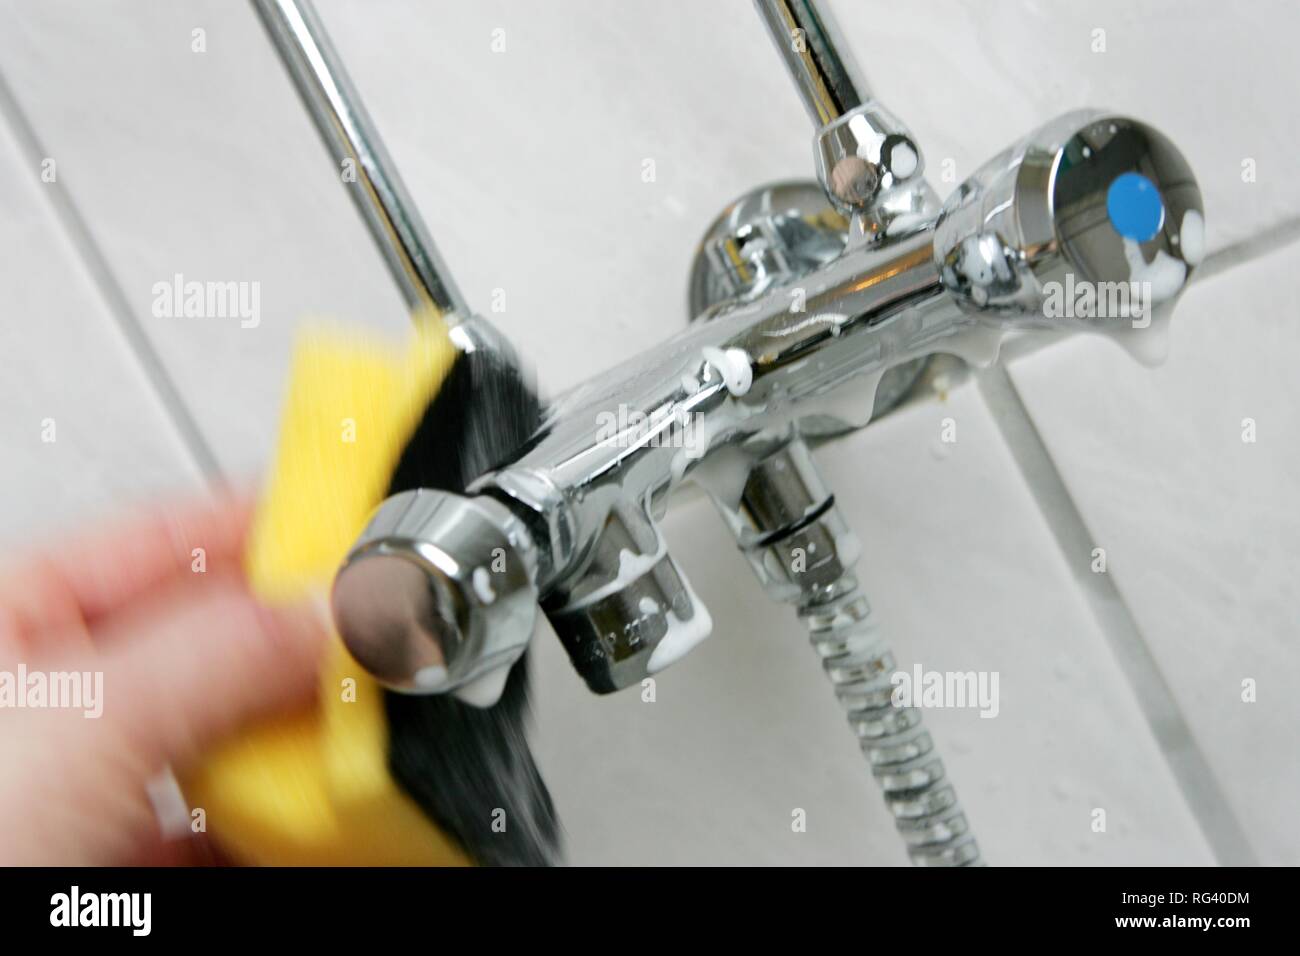 DEU, Germany : Housecleaning in a private house/apartment. Cleaning in the bathroom. Cleaning of the fittings. Stock Photo